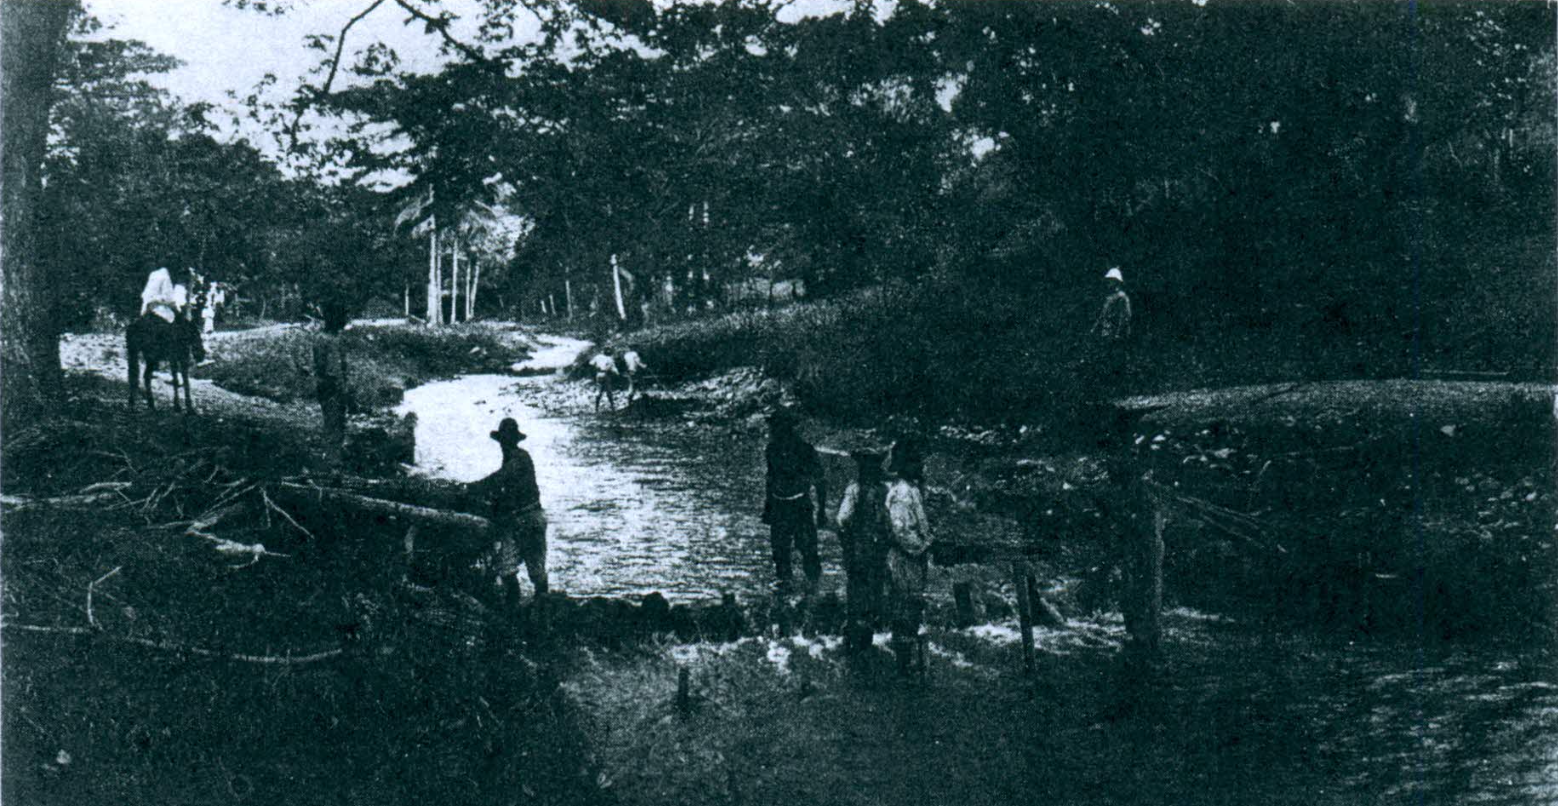 This stream or small river dry up today. This photo was taken after the 1919 flood on St. Croix. Historically, millions of gallows of water flowed into the ocean year around. Today, this stream only flowed during heavy rain. “on St. Croix, the most noteworthy among the seven large streams, which far inland are salt River on the northside, and Lagrande, or actually Lacgrandi in the west end.” This stream is “Lagrande” now called La Grange Gut. (Photo courtesy Library of Congress)